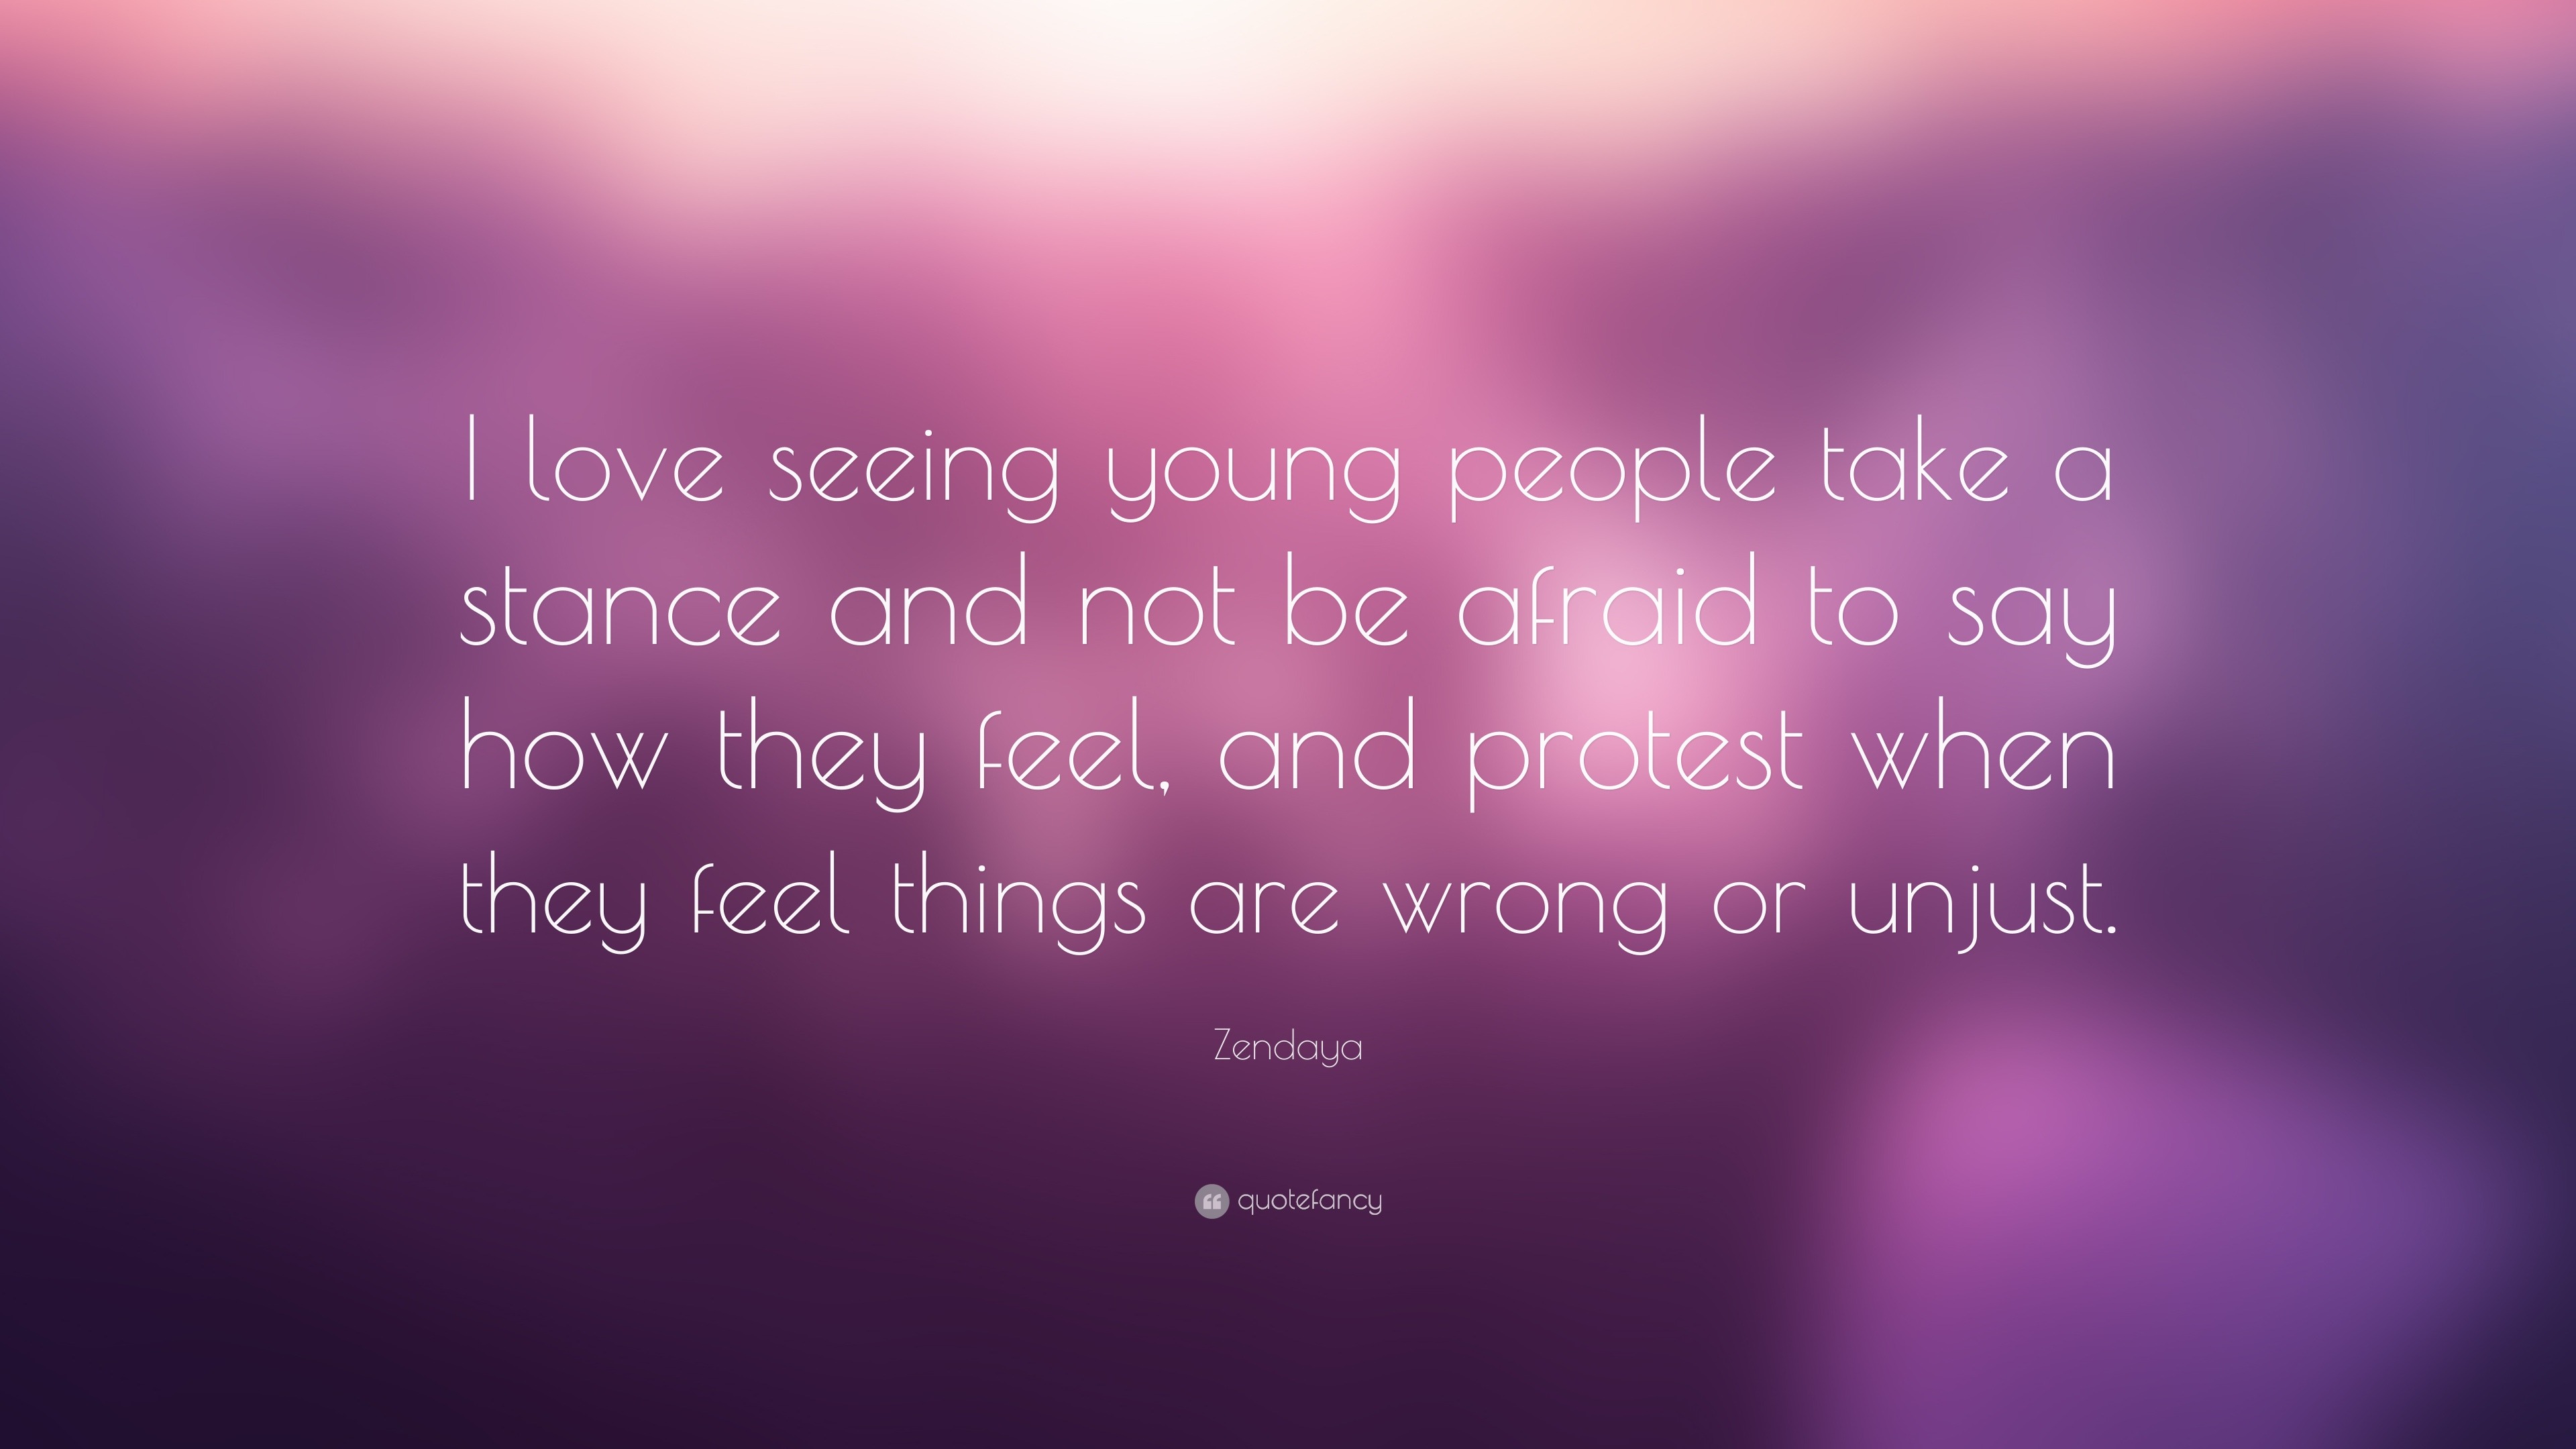 Zendaya Quote: “I love seeing young people take a stance and not be ...